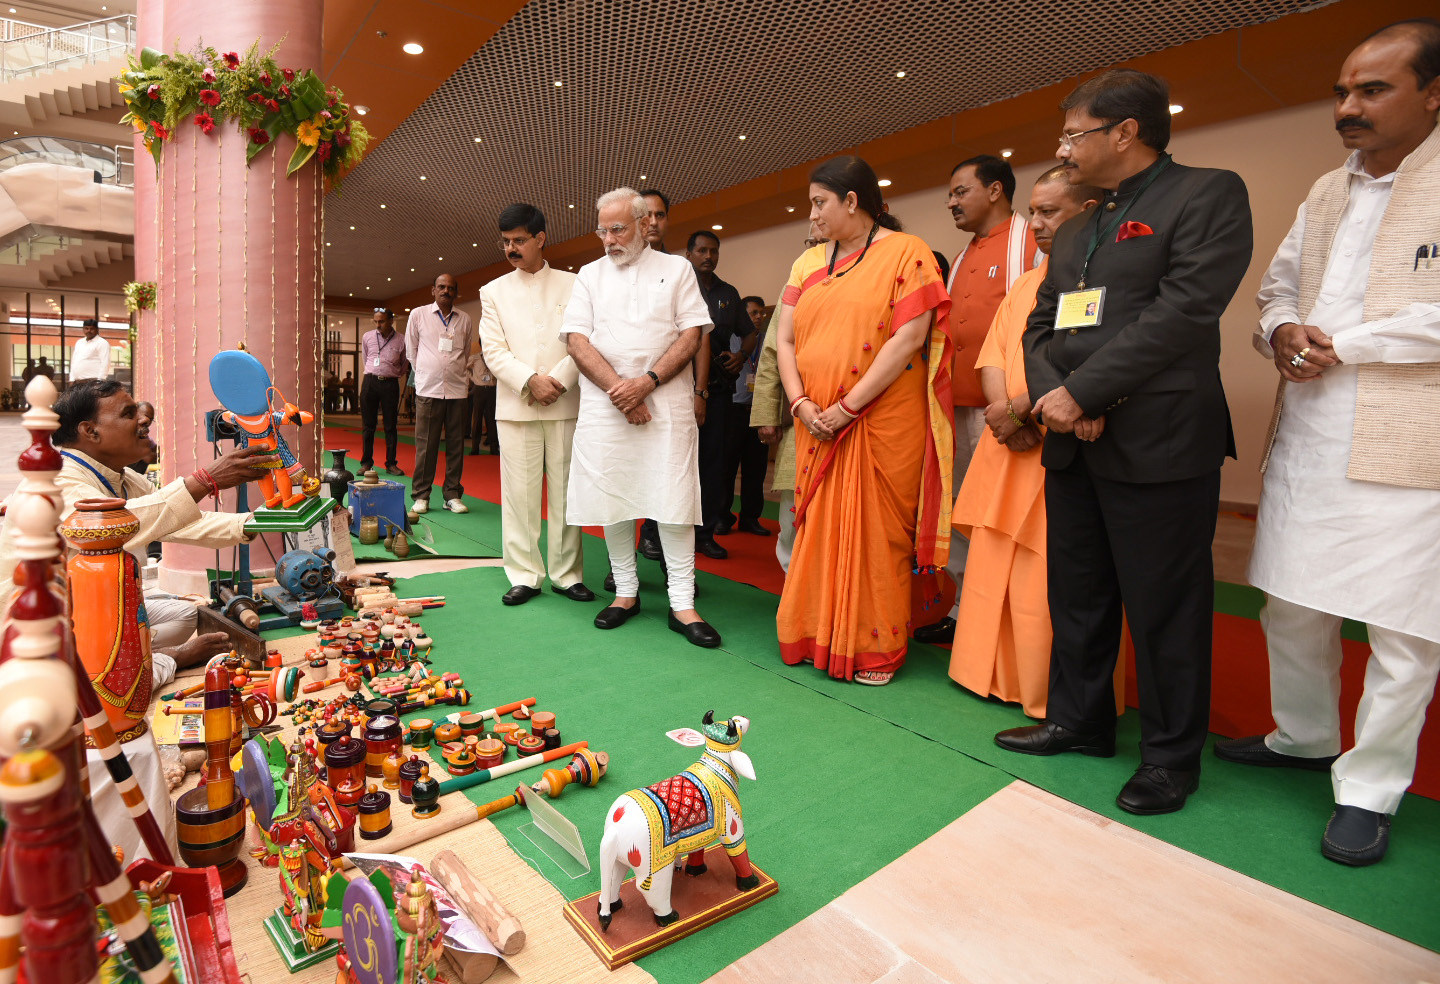 The Prime Minister, Shri Narendra Modi meets the artisans and weavers, at the Deendayal Hastkala Sankul, Varanasi, Uttar Pradesh on September 22, 2017. The Union Minister for Textiles and Information & Broadcasting, Smt. Smriti Irani, the Chief Minister, Uttar Pradesh, Yogi Adityanath, the Minister of State for Textiles, Shri Ajay Tamta and the Deputy Chief Minister, Uttar Pradesh, Shri Keshav Prasad Maurya are also seen.